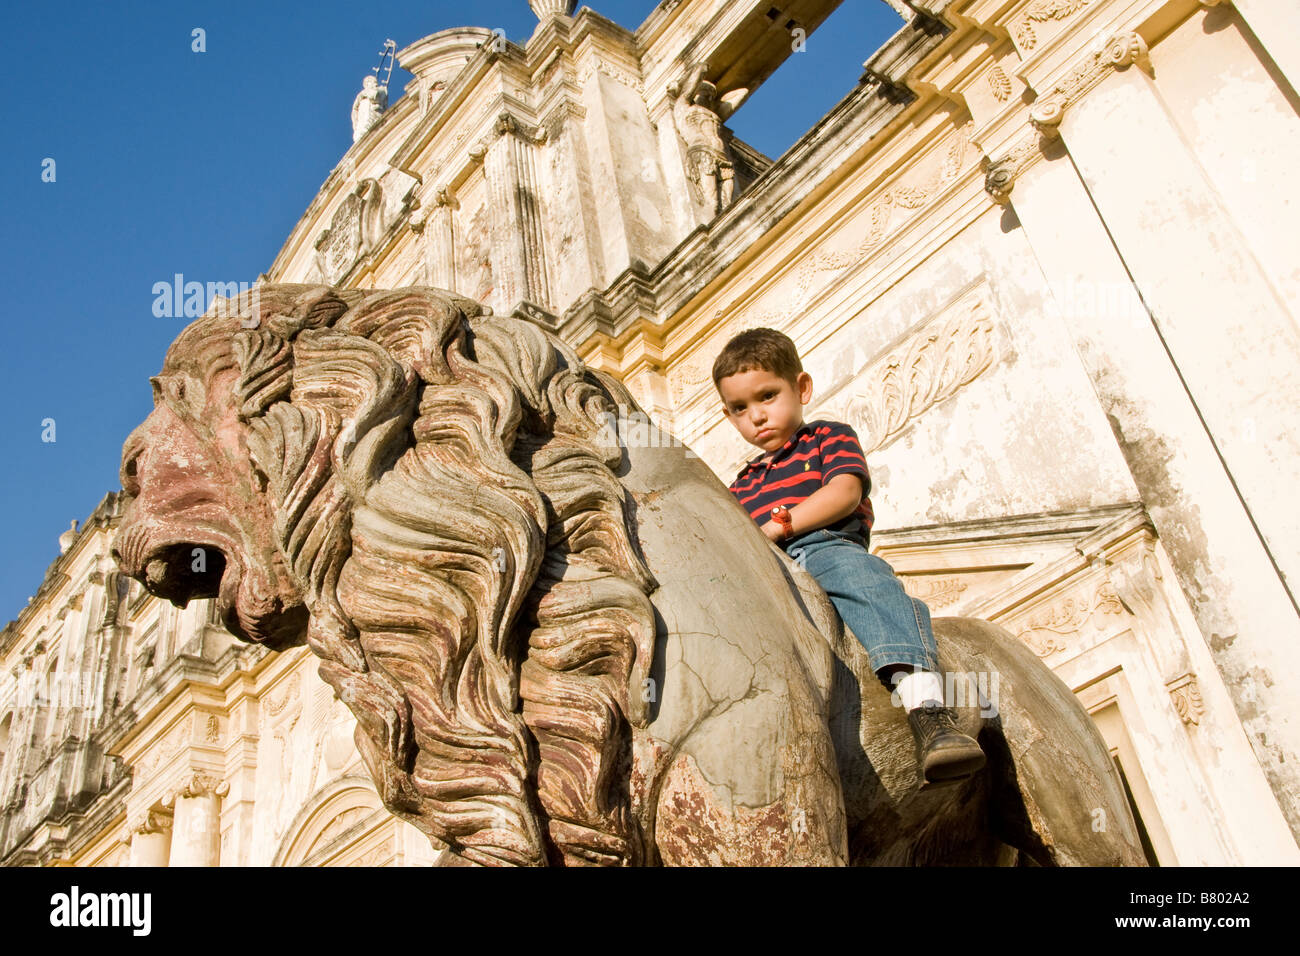 Leon Cathedral, Spanish colonial architecture, with Nicaraguan boy on lion statue flanking entrance Stock Photo